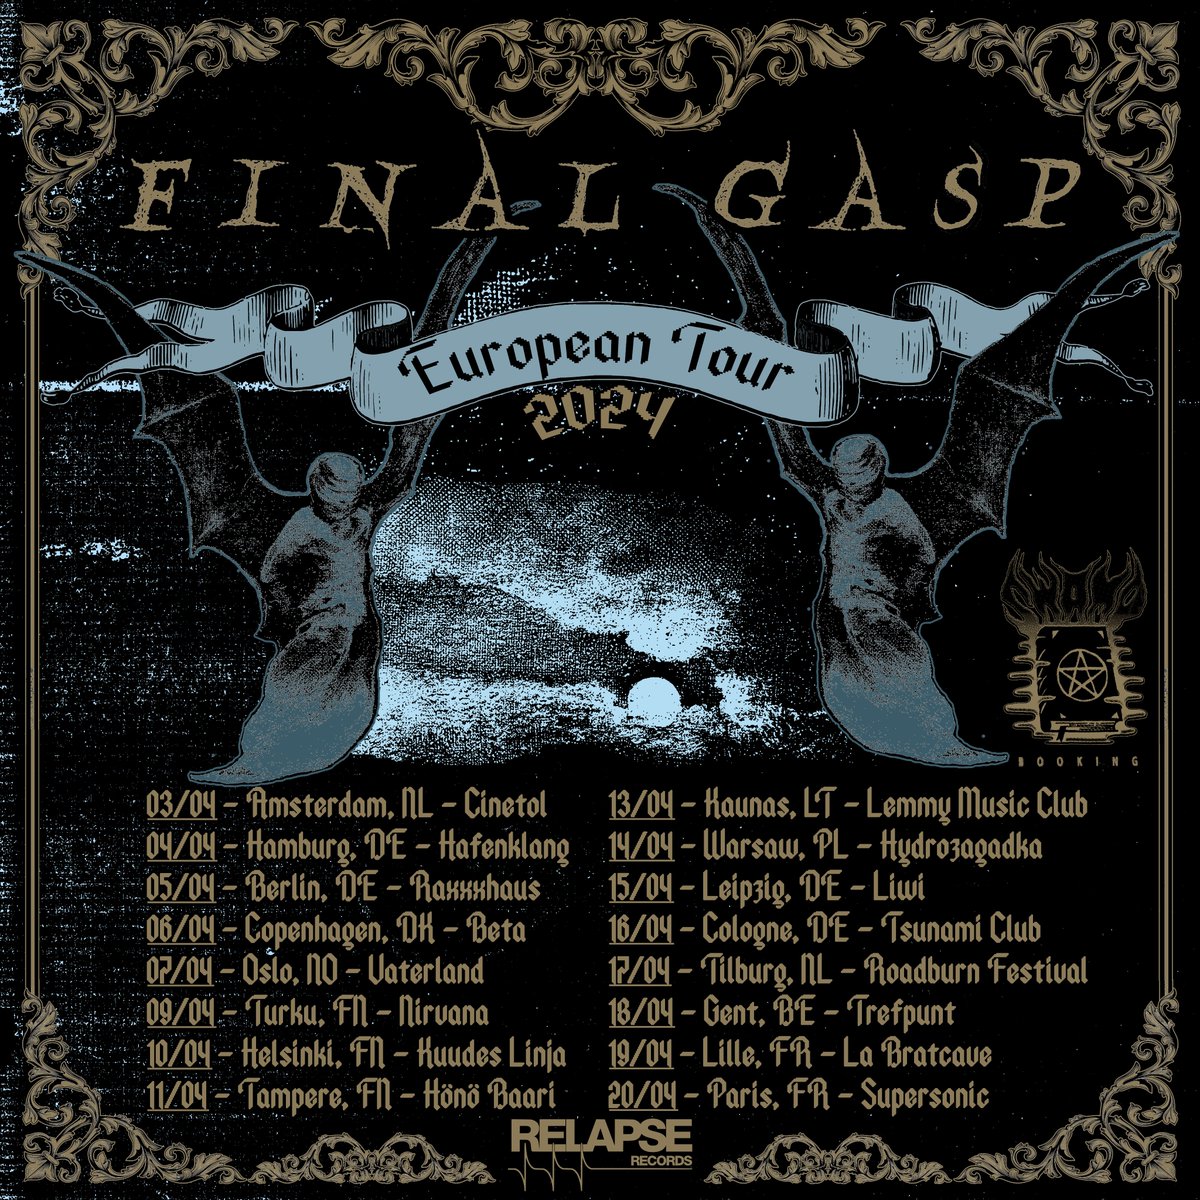 FINAL GASP begin their first EU tour tonight in support of their debut album Mourning Moon! linktr.ee/finalgasp